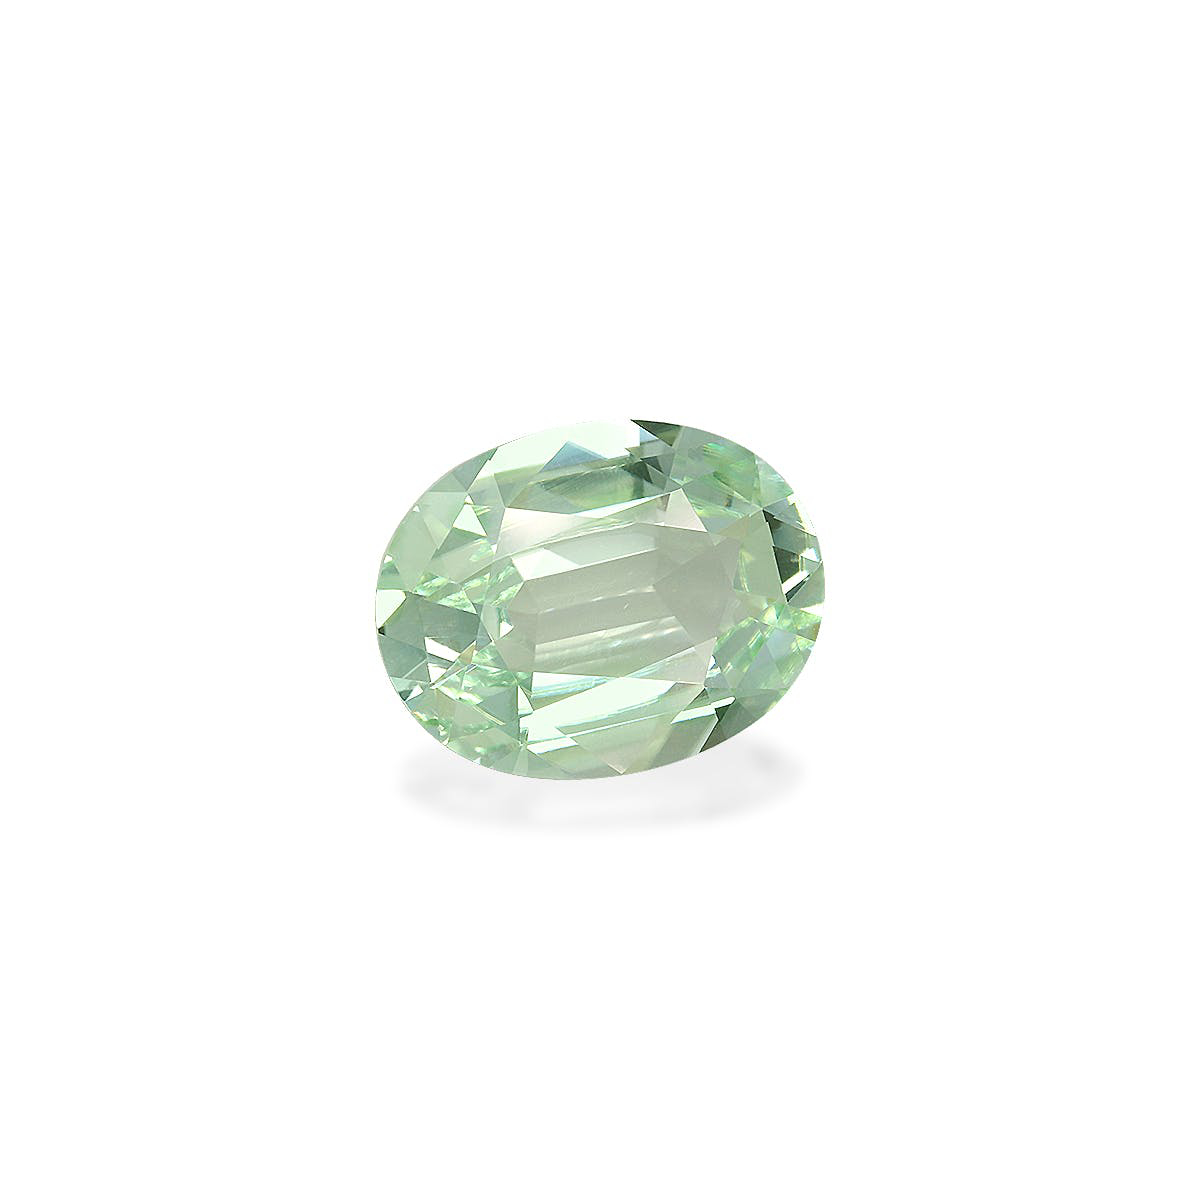 Picture of Mist Green Tourmaline 8.63ct (TG1542)